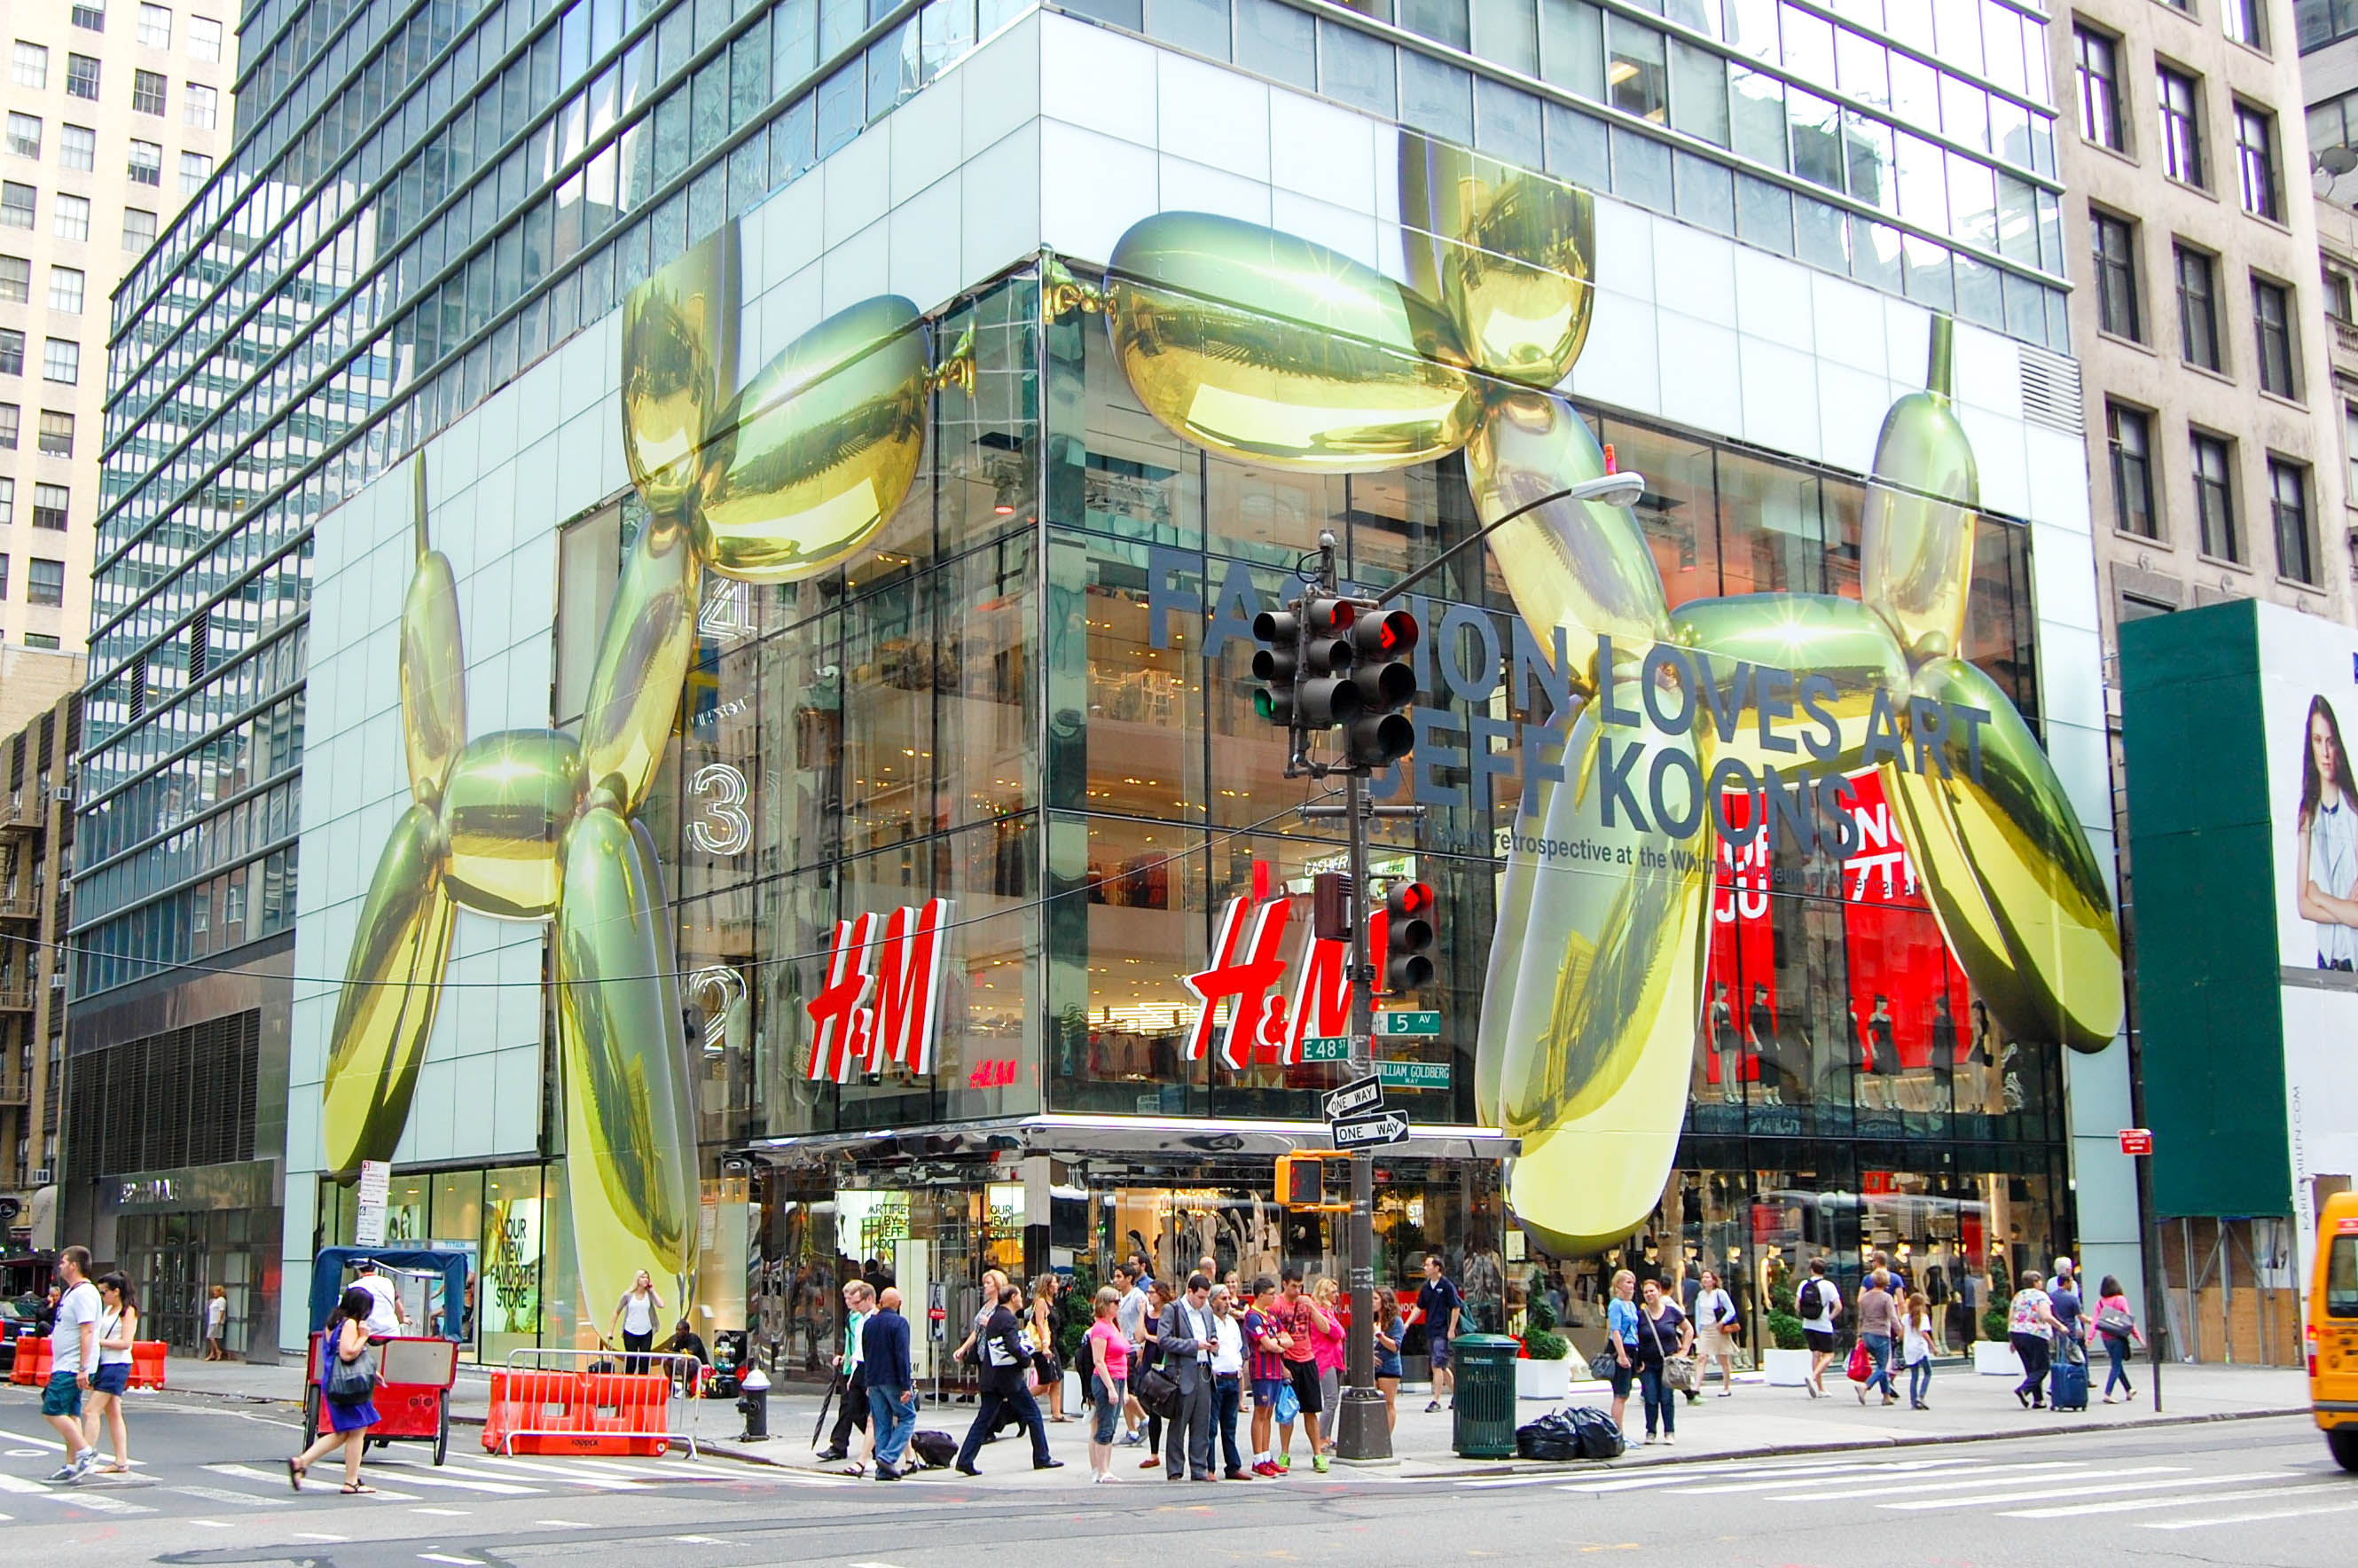 H&M Flagship Stores